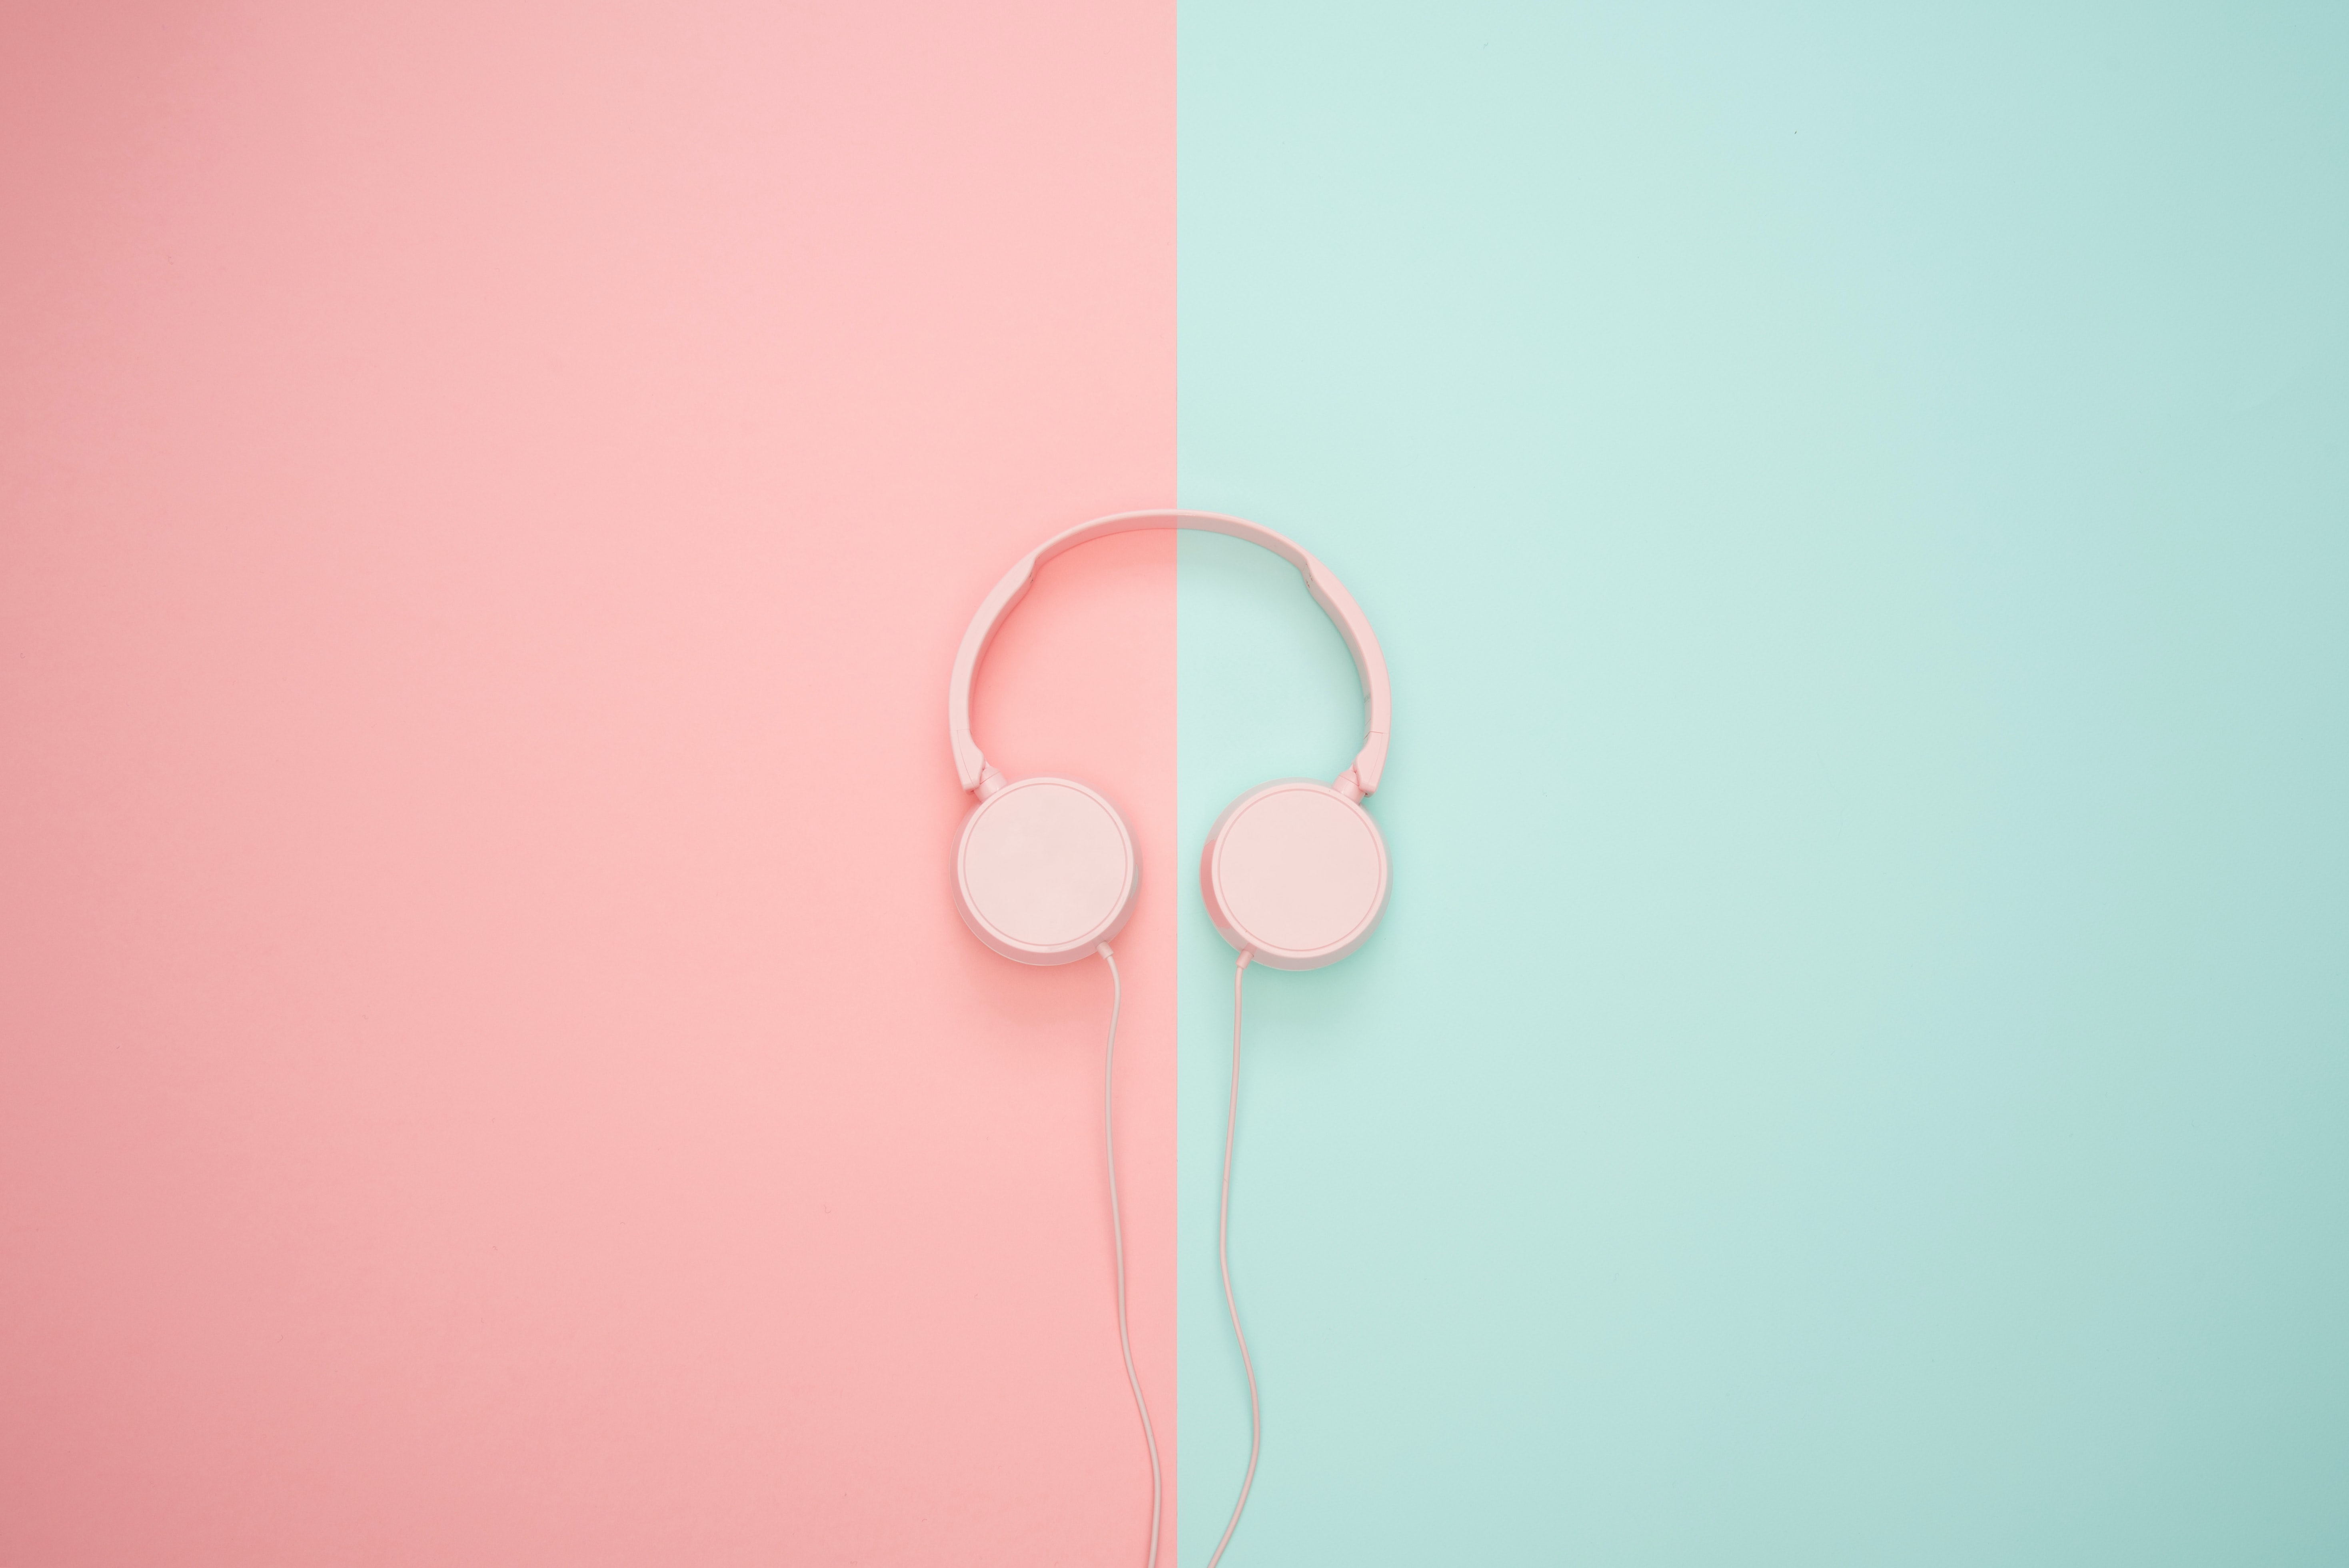 Pink and green background with pink headphones sitting in the center.